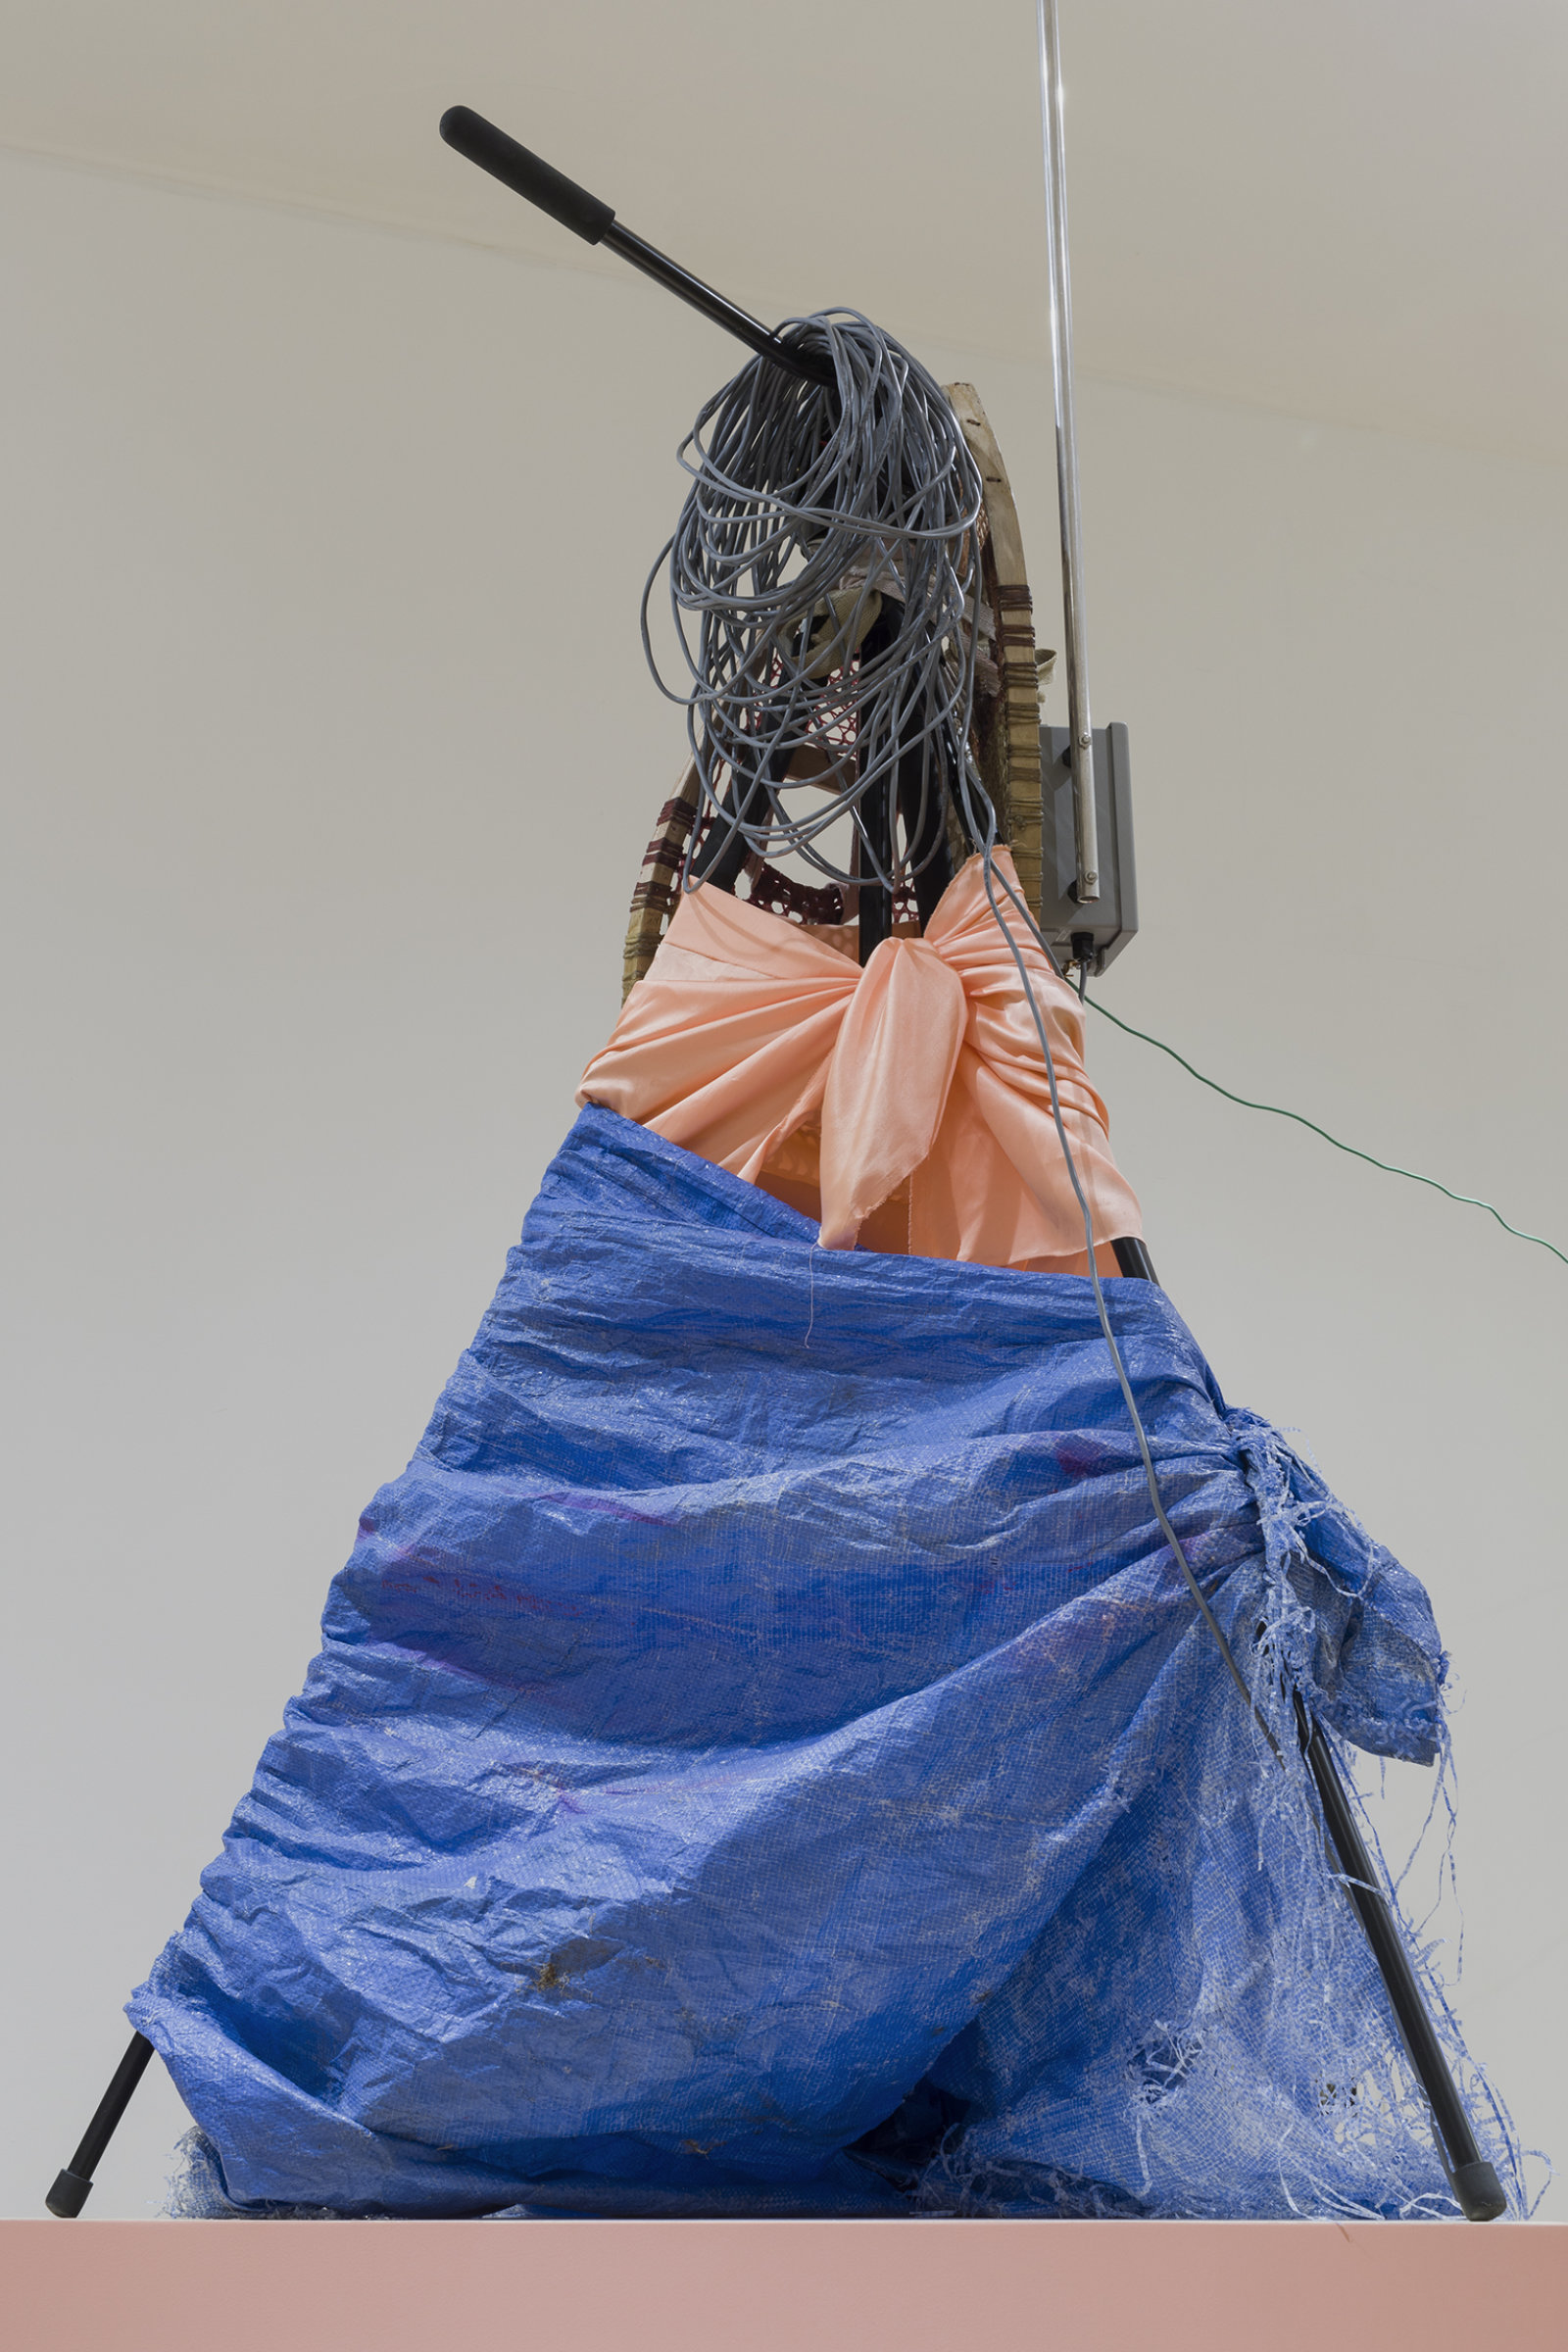 Duane Linklater, apparatus for the dissemination of Indigenous ideas and sounds into the air (detail), 2017, tripod, radio transmitter, hand-dyed snowshoes, tarpaulin, fabric, string, stone, tape, speaker, paint, wiring, wiring, dimensions variable. Installation view, apparatus for the circulation of Indigenous ideas and sounds into the air, Western Front, Vancouver, 2017